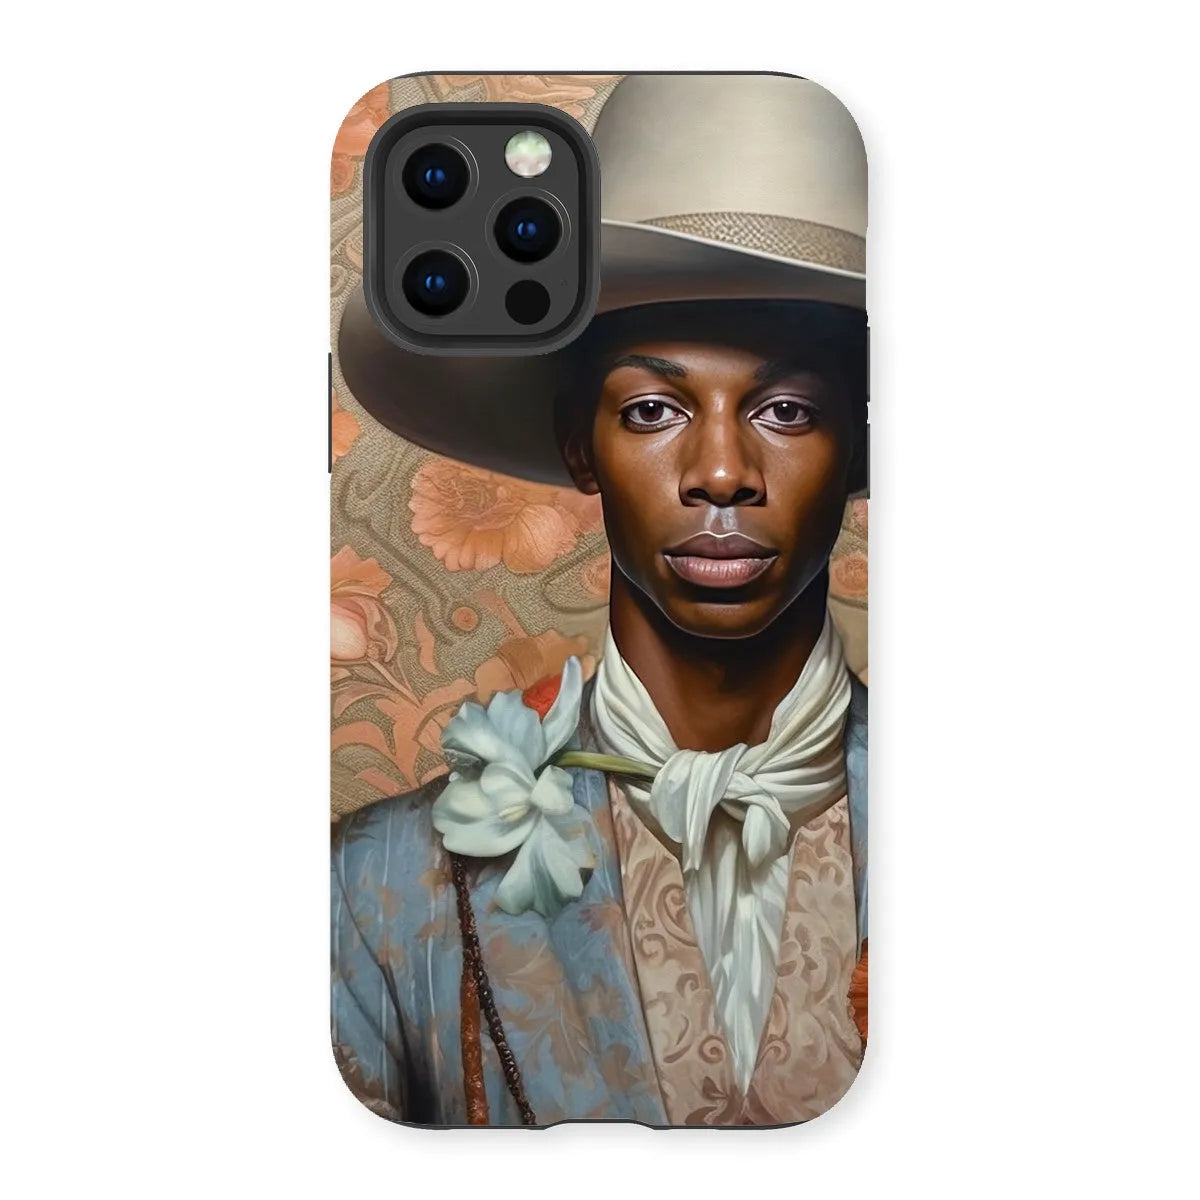 Apollo The Gay Cowboy - Gay Aesthetic Art Phone Case - Iphone 13 Pro / Matte - Mobile Phone Cases - Aesthetic Art